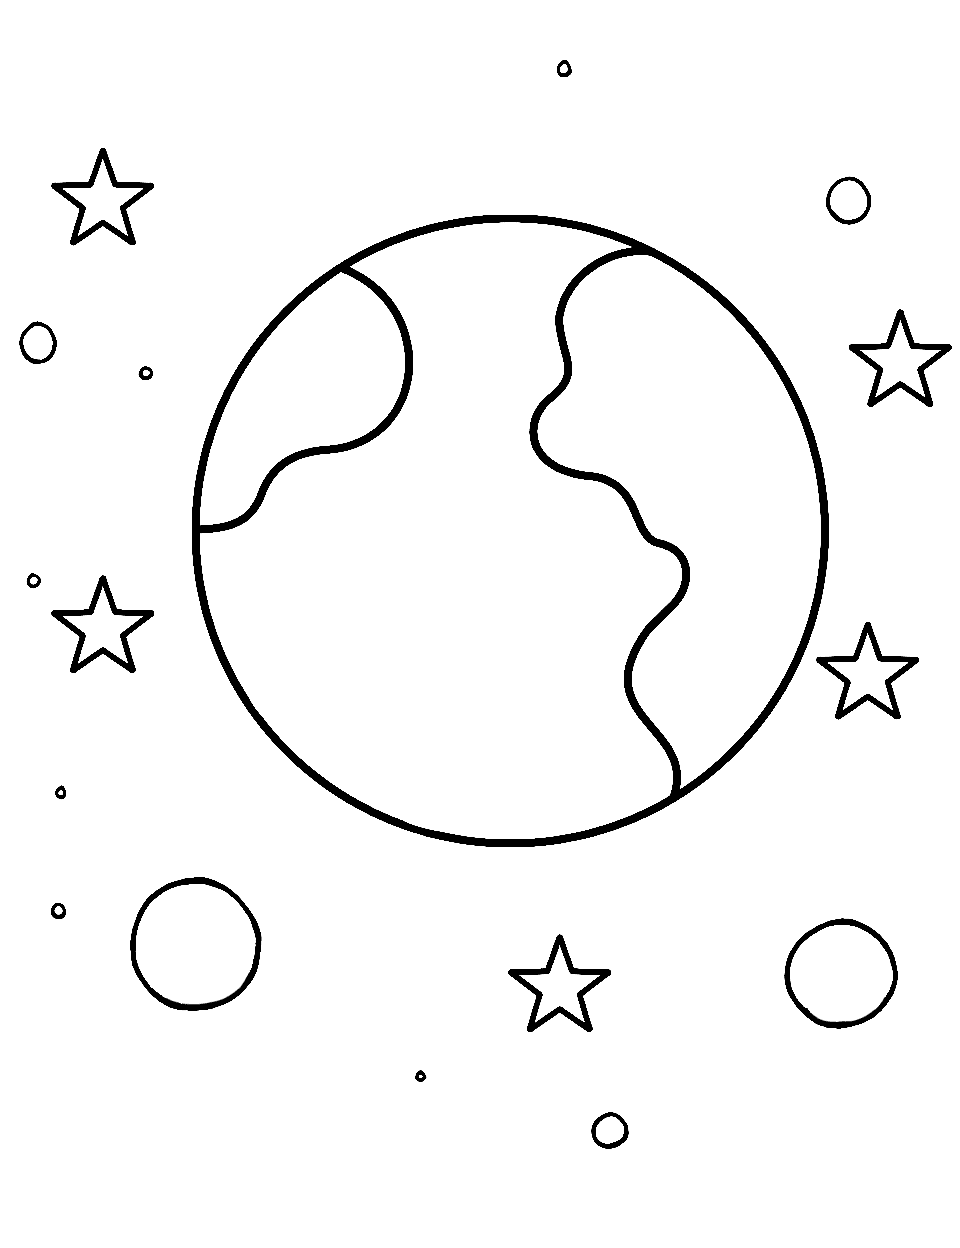 Earth from Afar Coloring Page - A view of Earth against the vast emptiness of space.